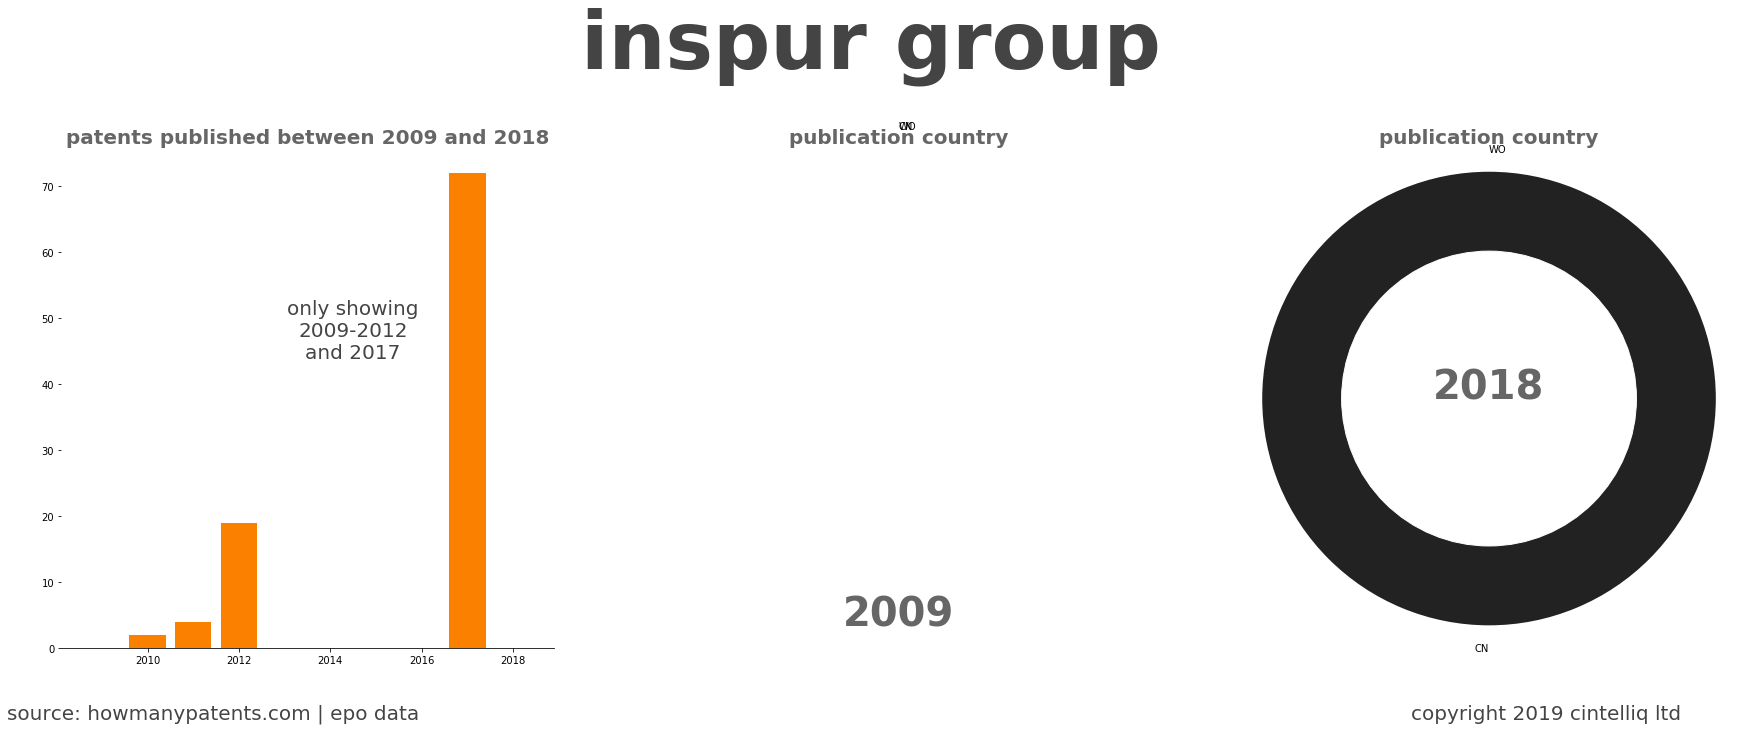 summary of patents for Inspur Group